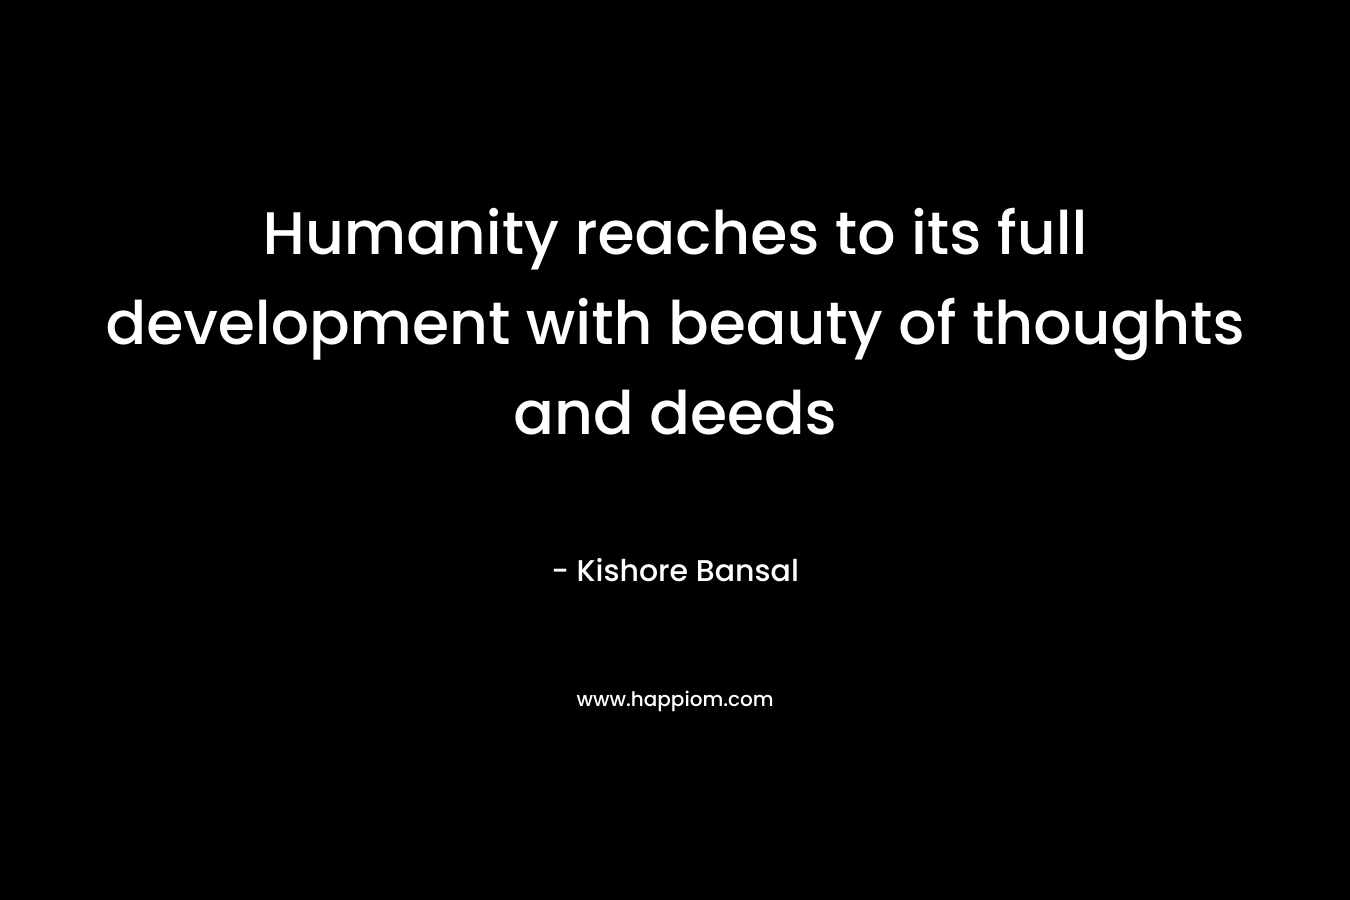 Humanity reaches to its full development with beauty of thoughts and deeds